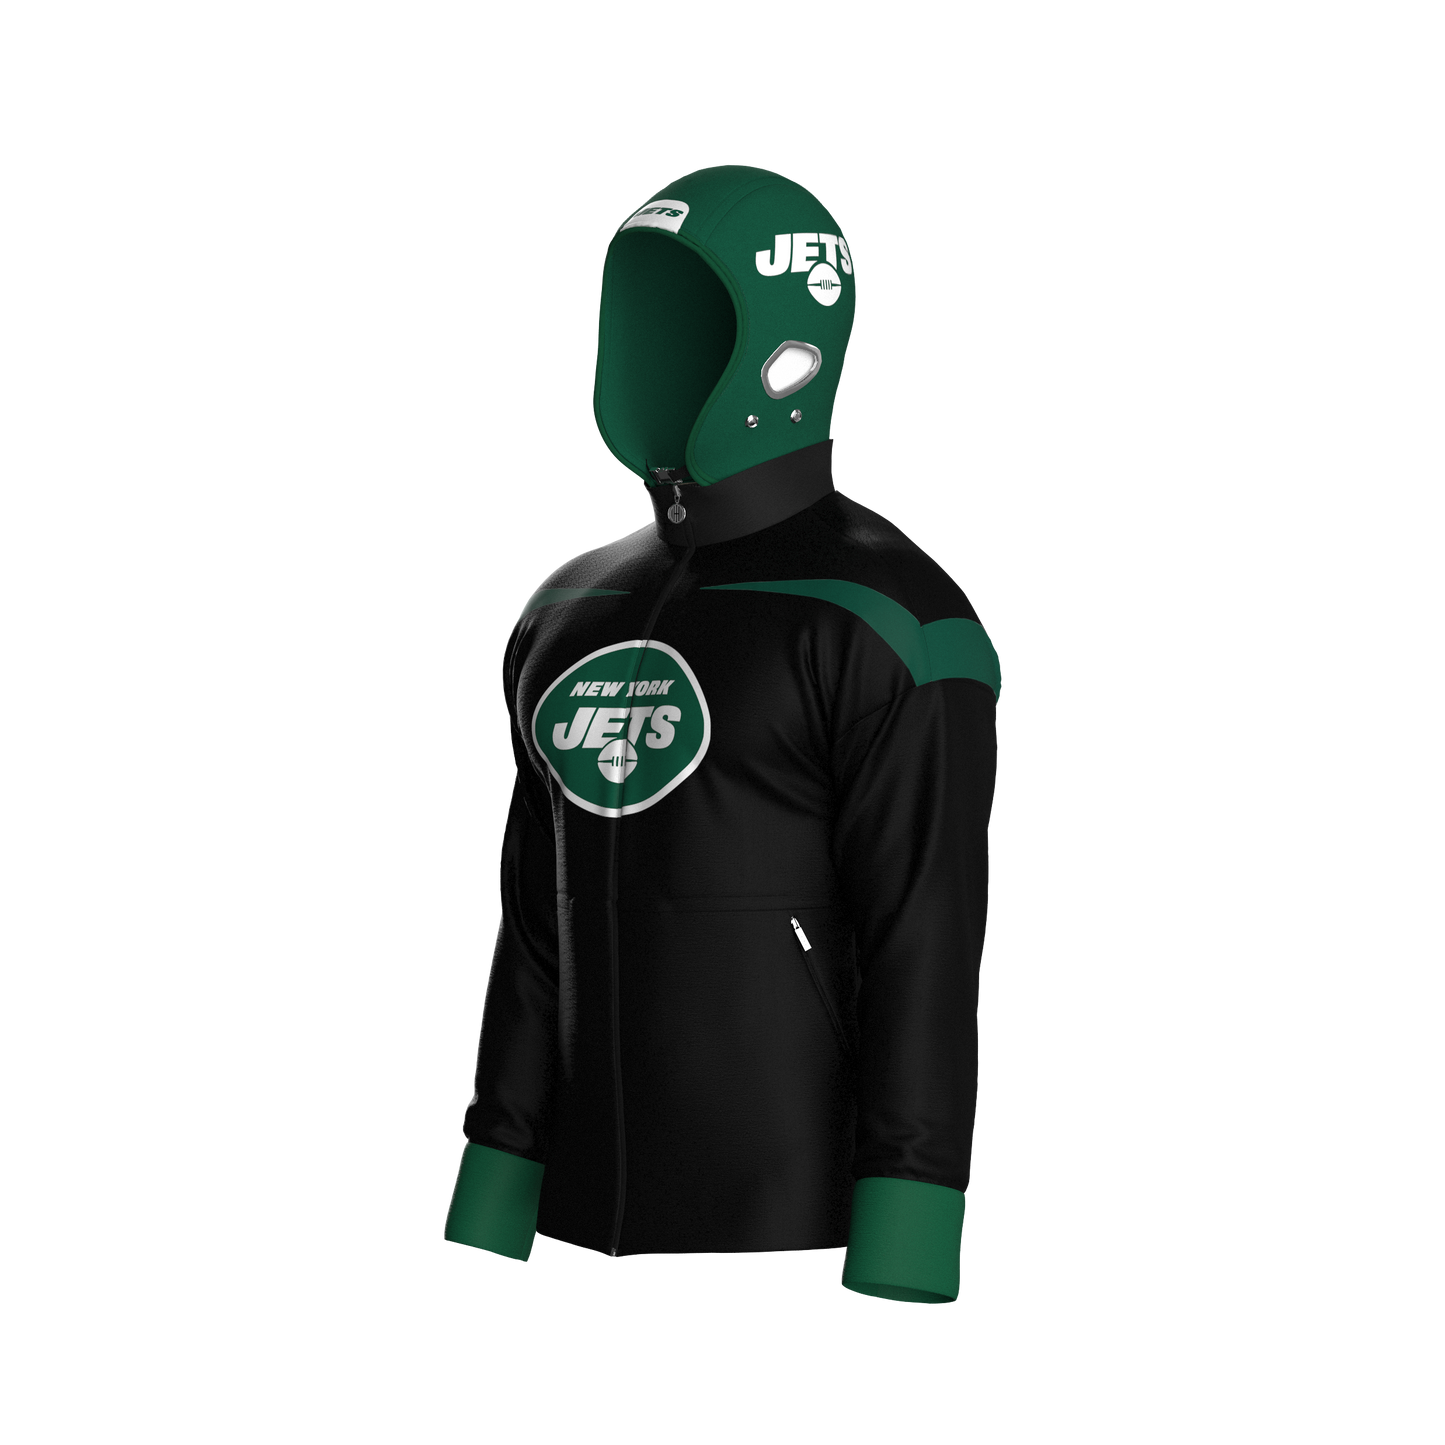 New York Jets Home Zip-Up (adult)